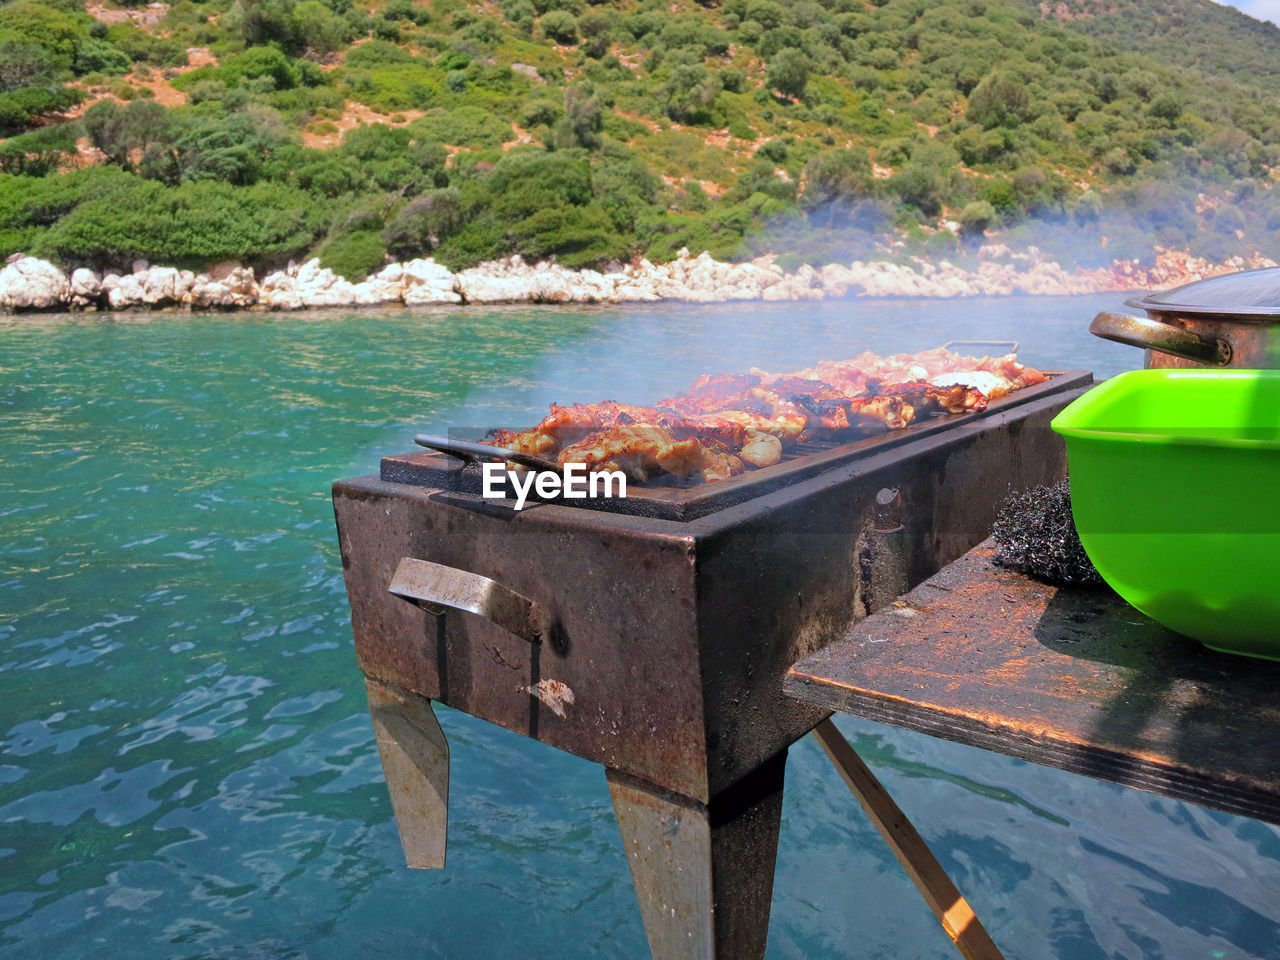 SCENIC VIEW OF BARBECUE GRILL BY LAKE